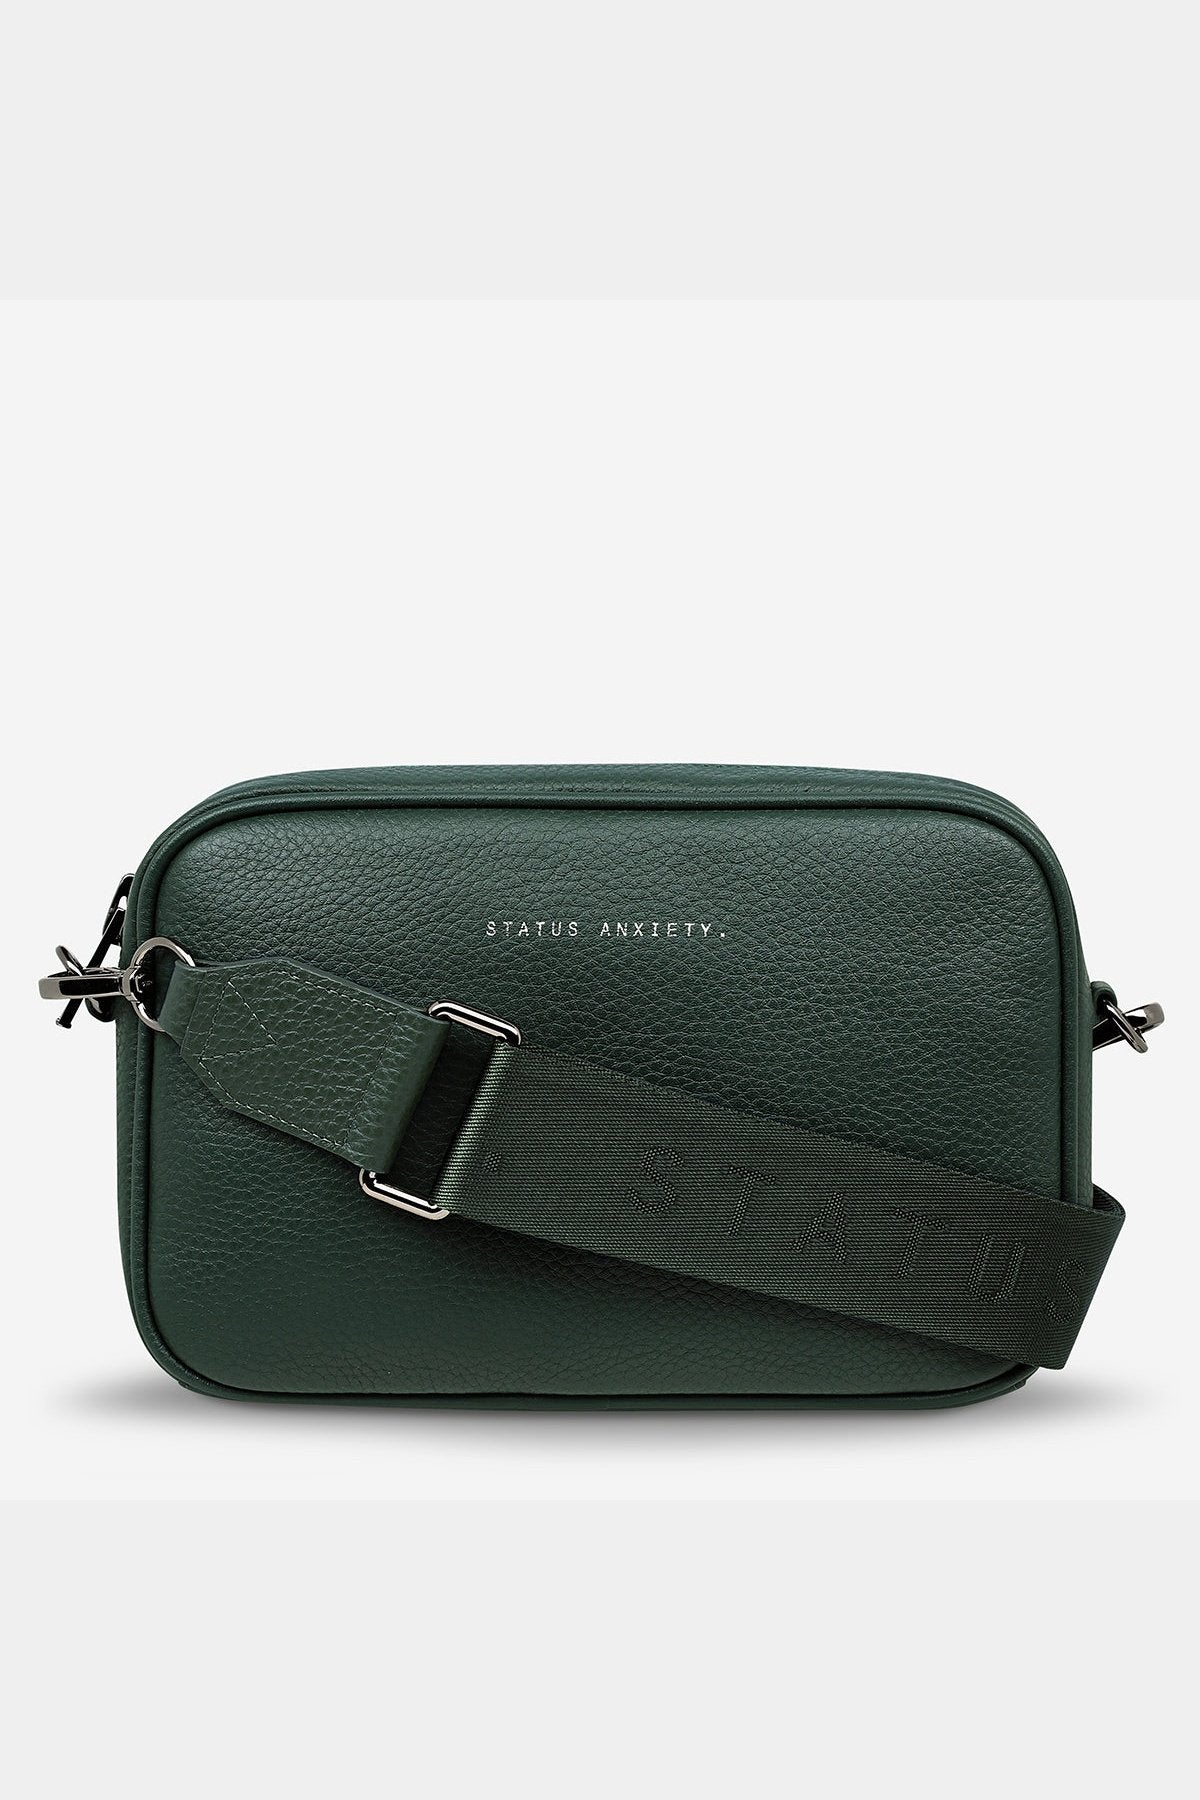 Status anxiety - plunder with webbed strap - green